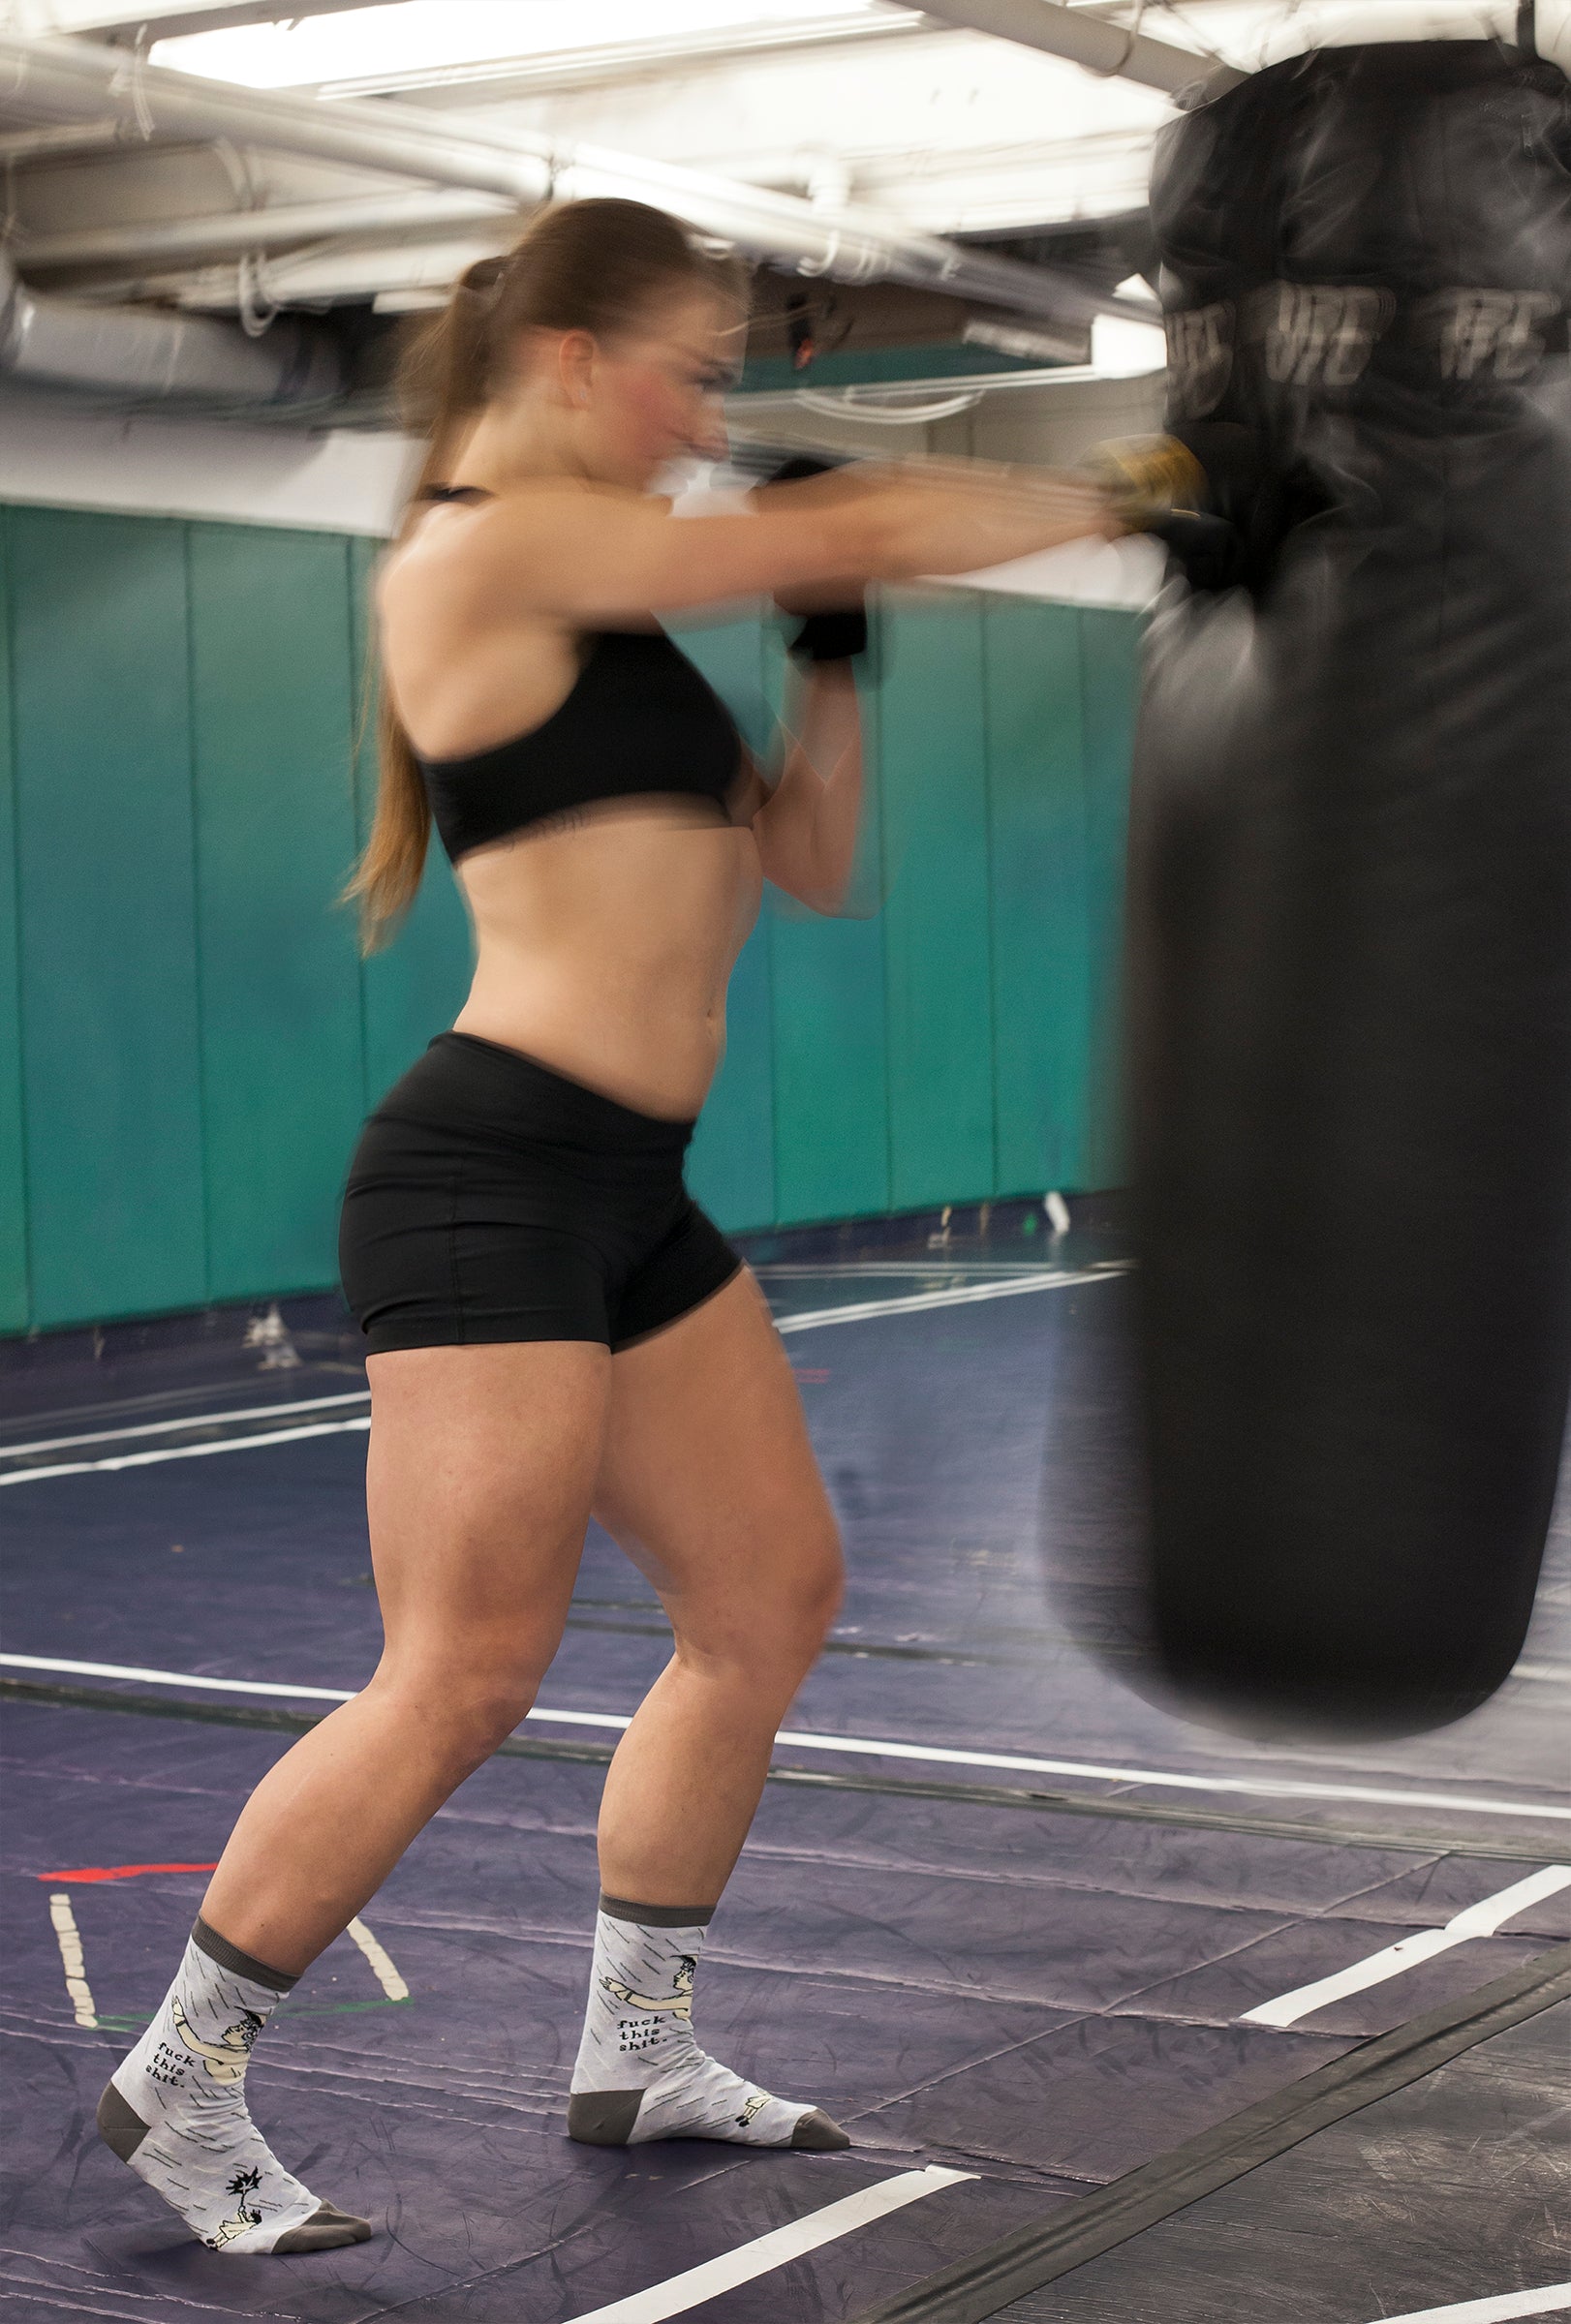 A strong looking woman in active wear is pictured in this blurry image punching a punching bag. On her feet are the grey 